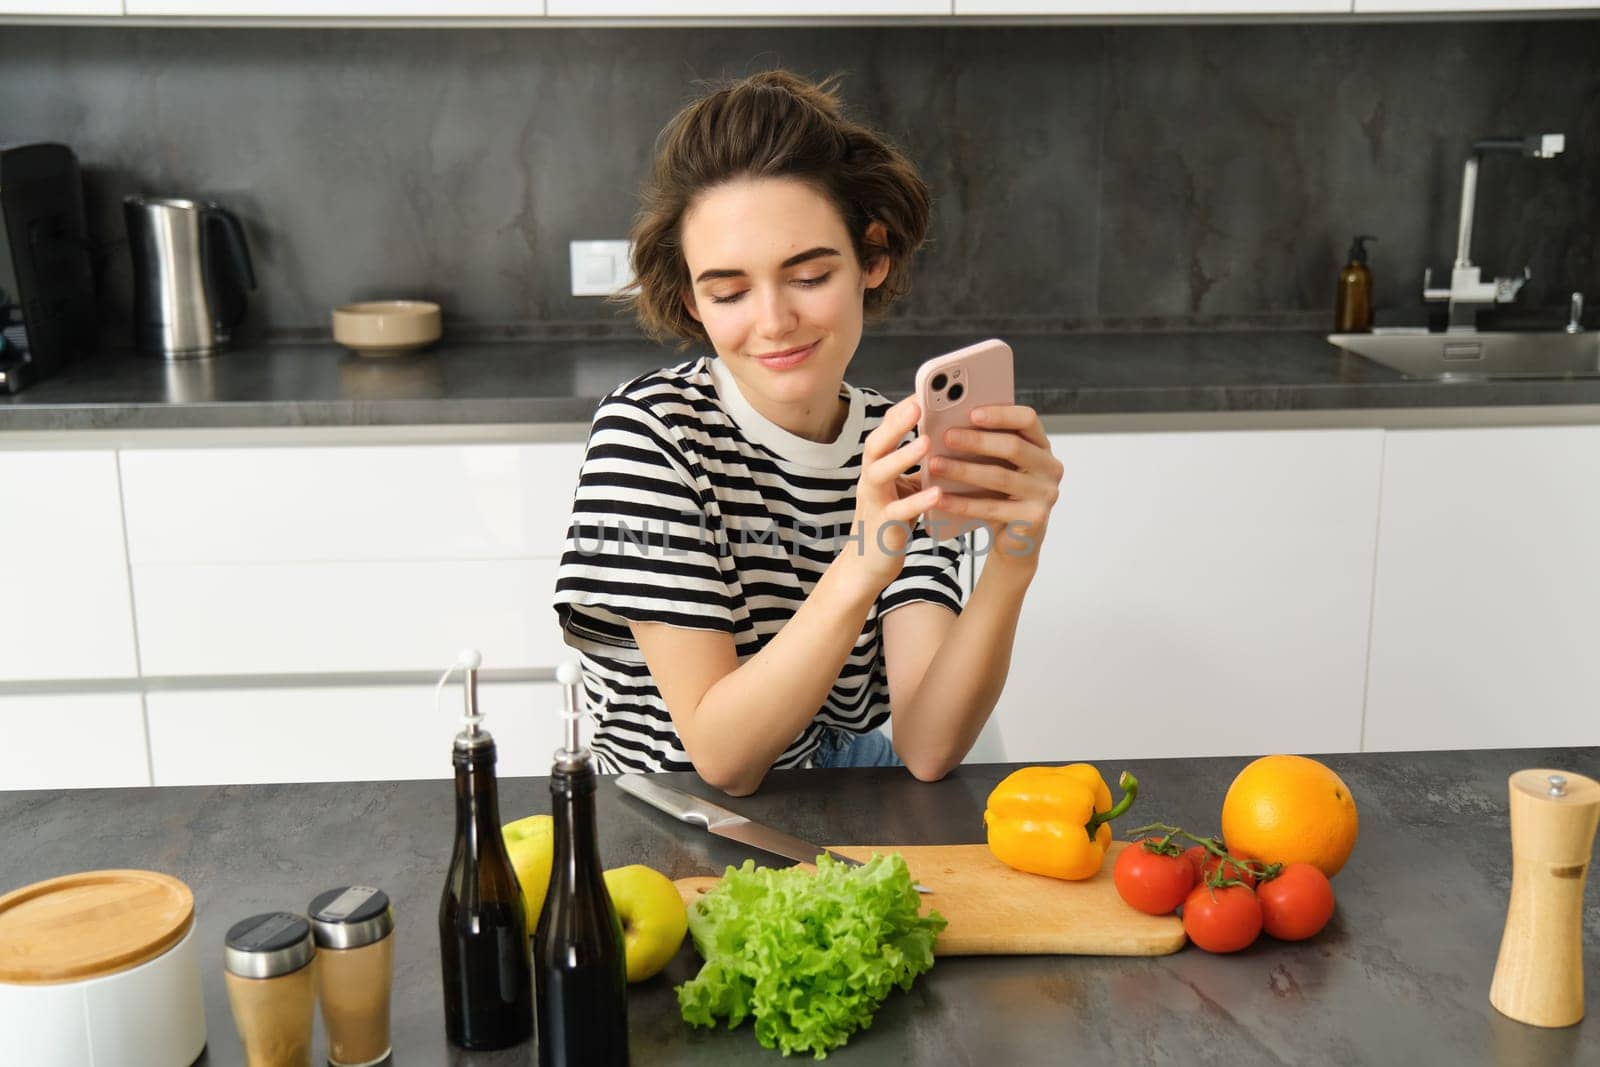 Portrait of young woman with smartphone, sitting in the kitchen and cooking salad, searching for healthy recipe online, has vegetables and chopping board on the table.